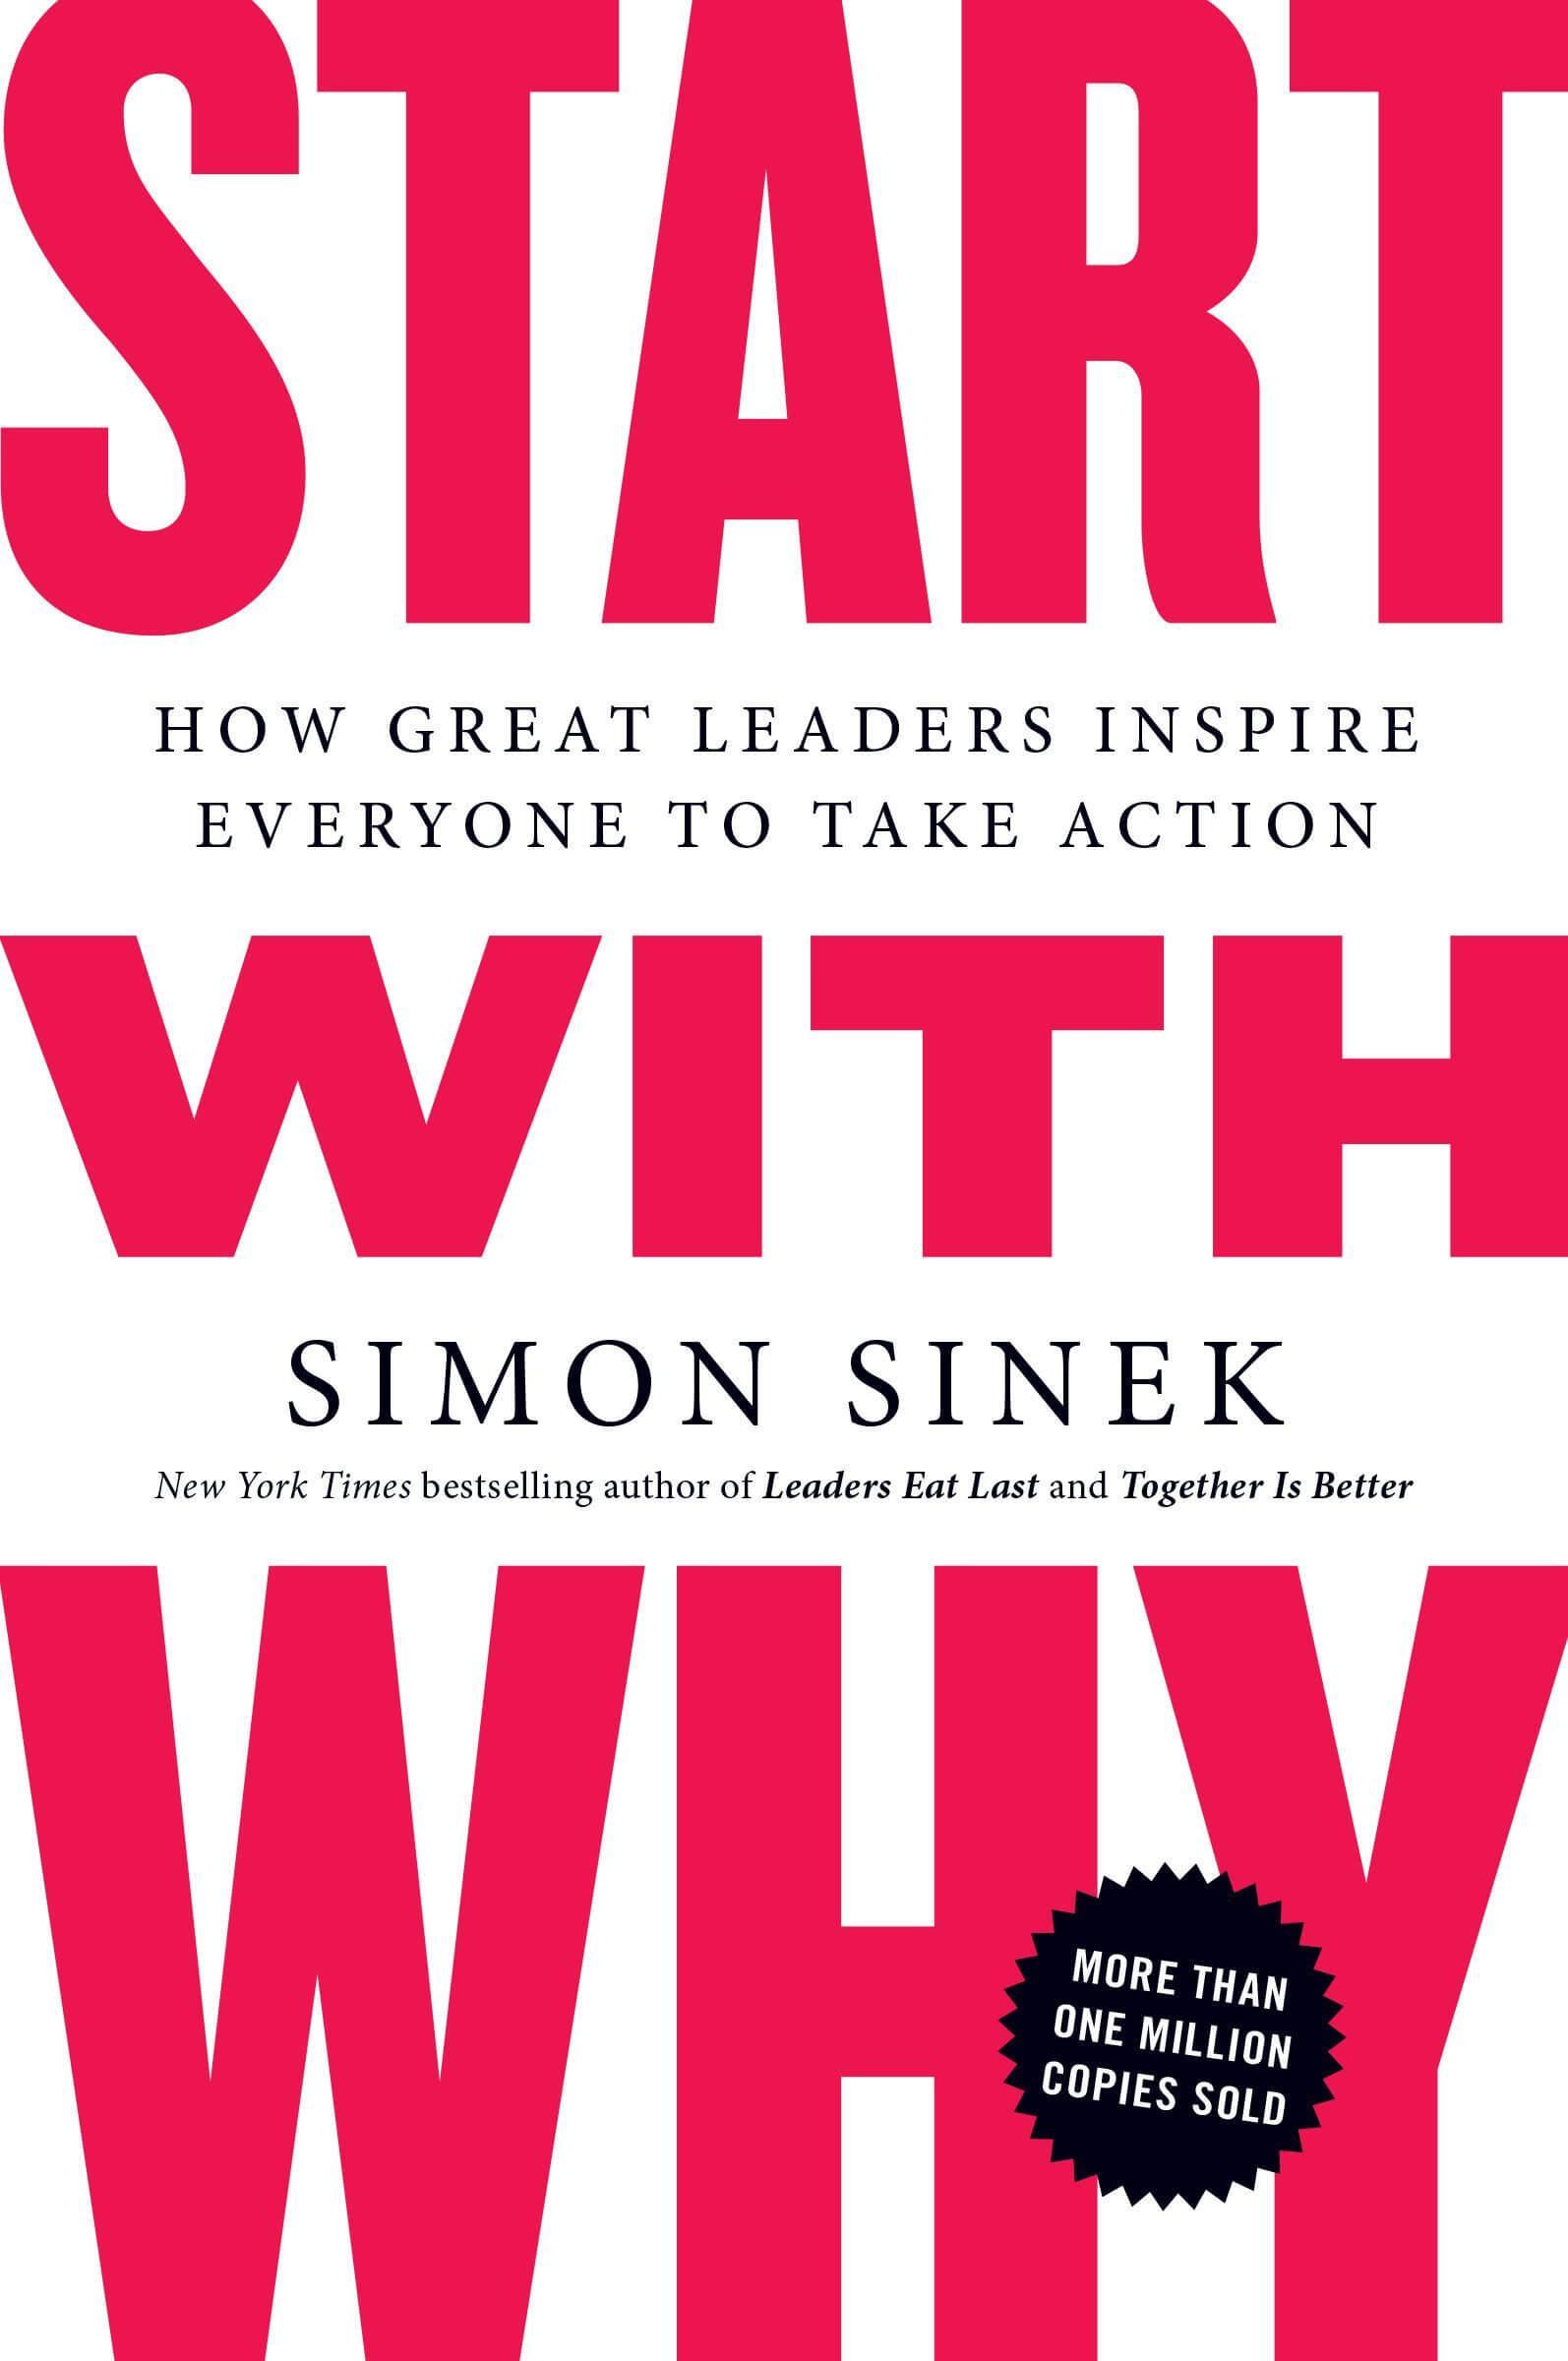 book cover of Simon Sinek's "Start With Why"